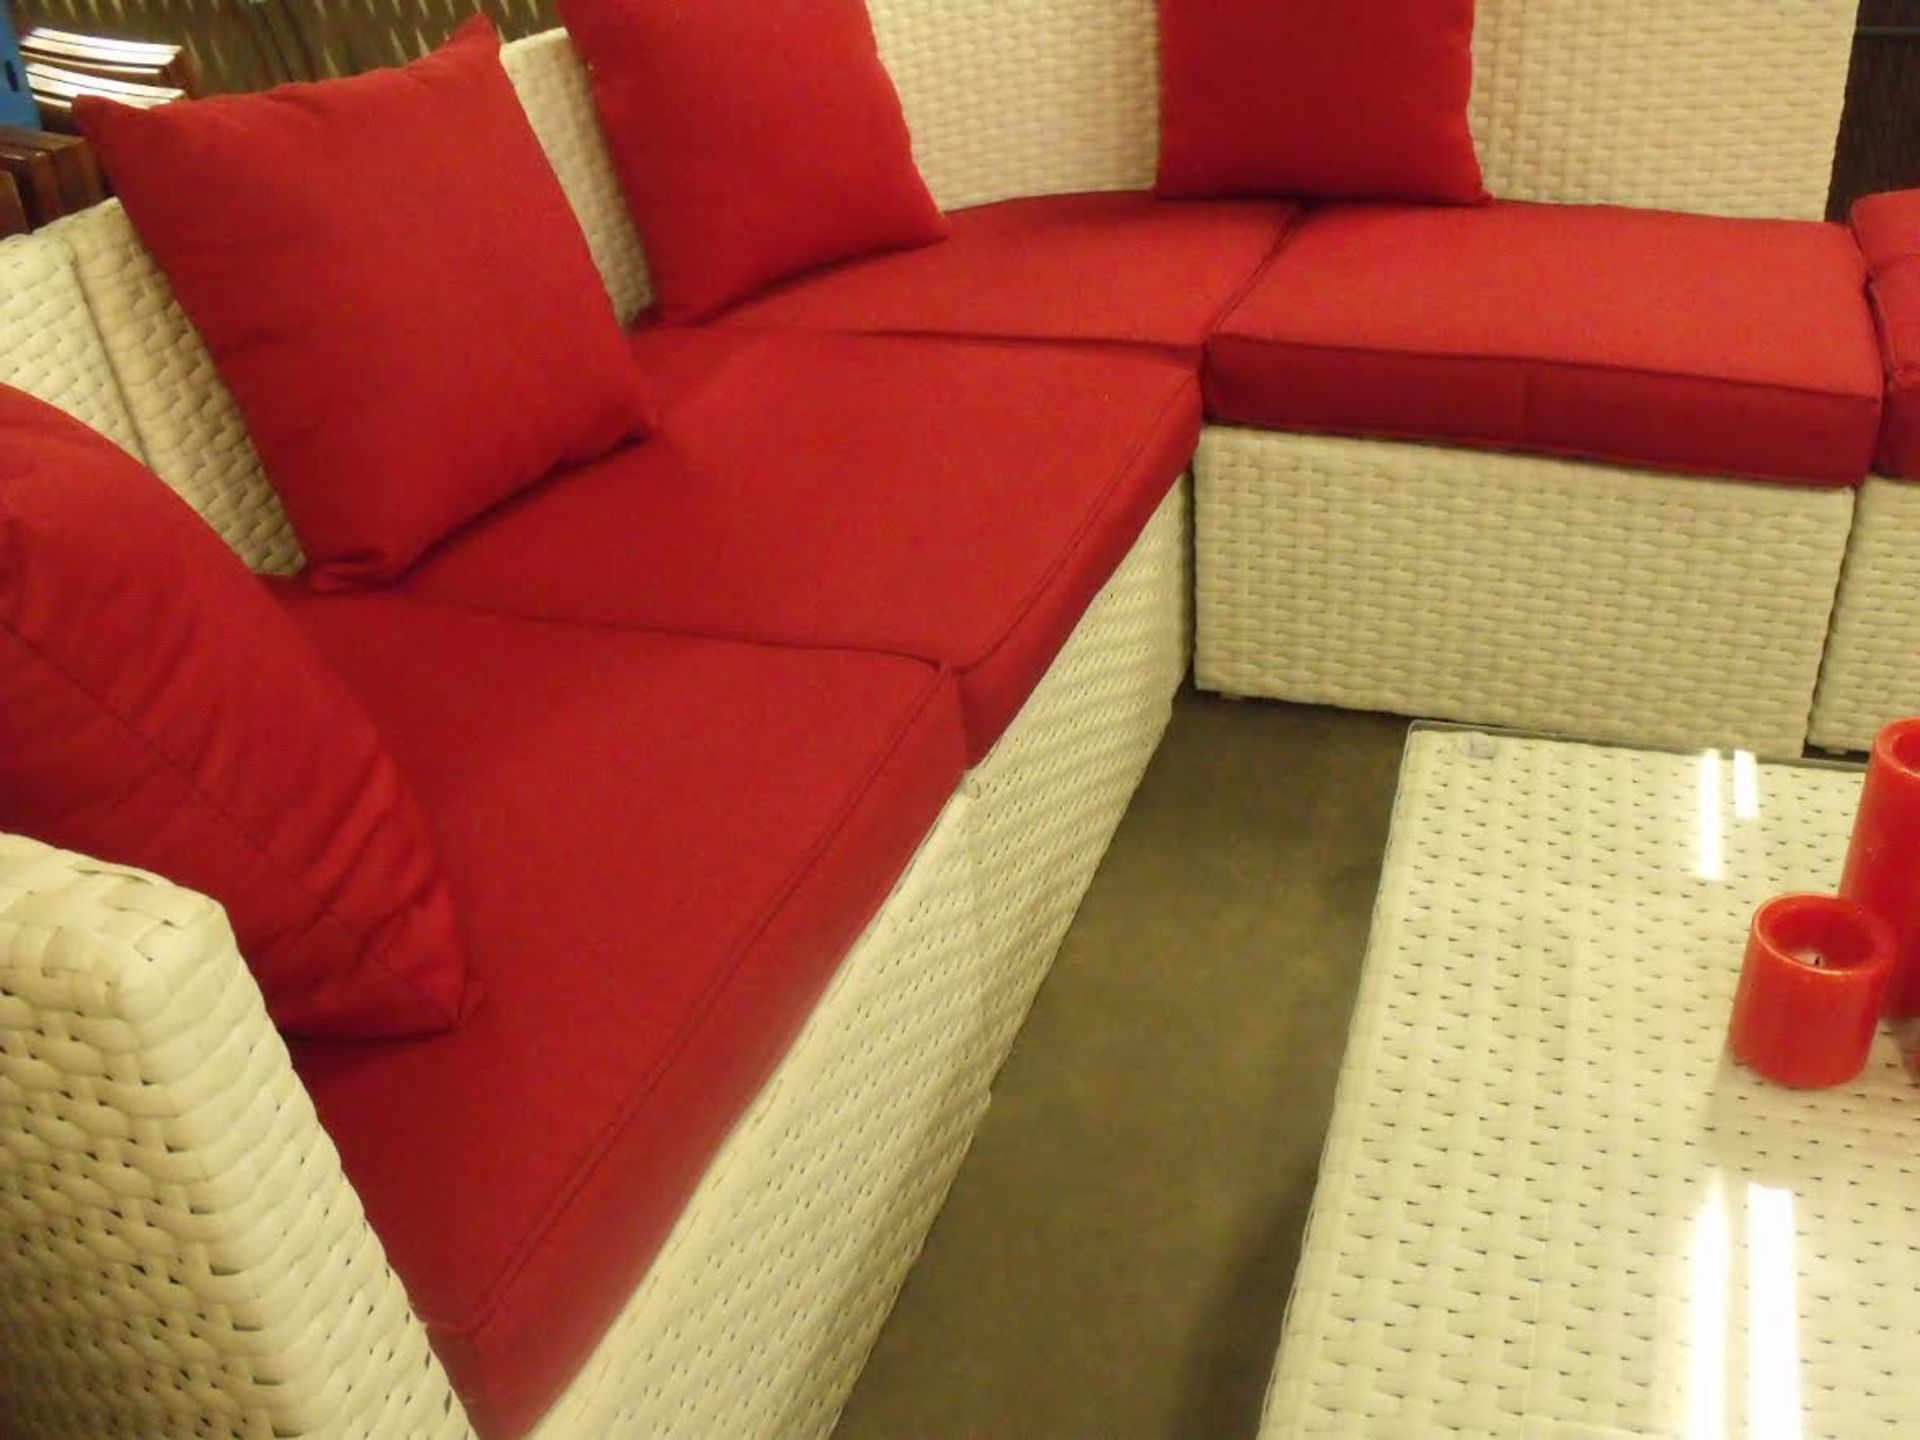 Paphos 6 piece All Weather Rattan Corner Sofa Set Aluminium frame white in colour with Red throw - Image 2 of 3